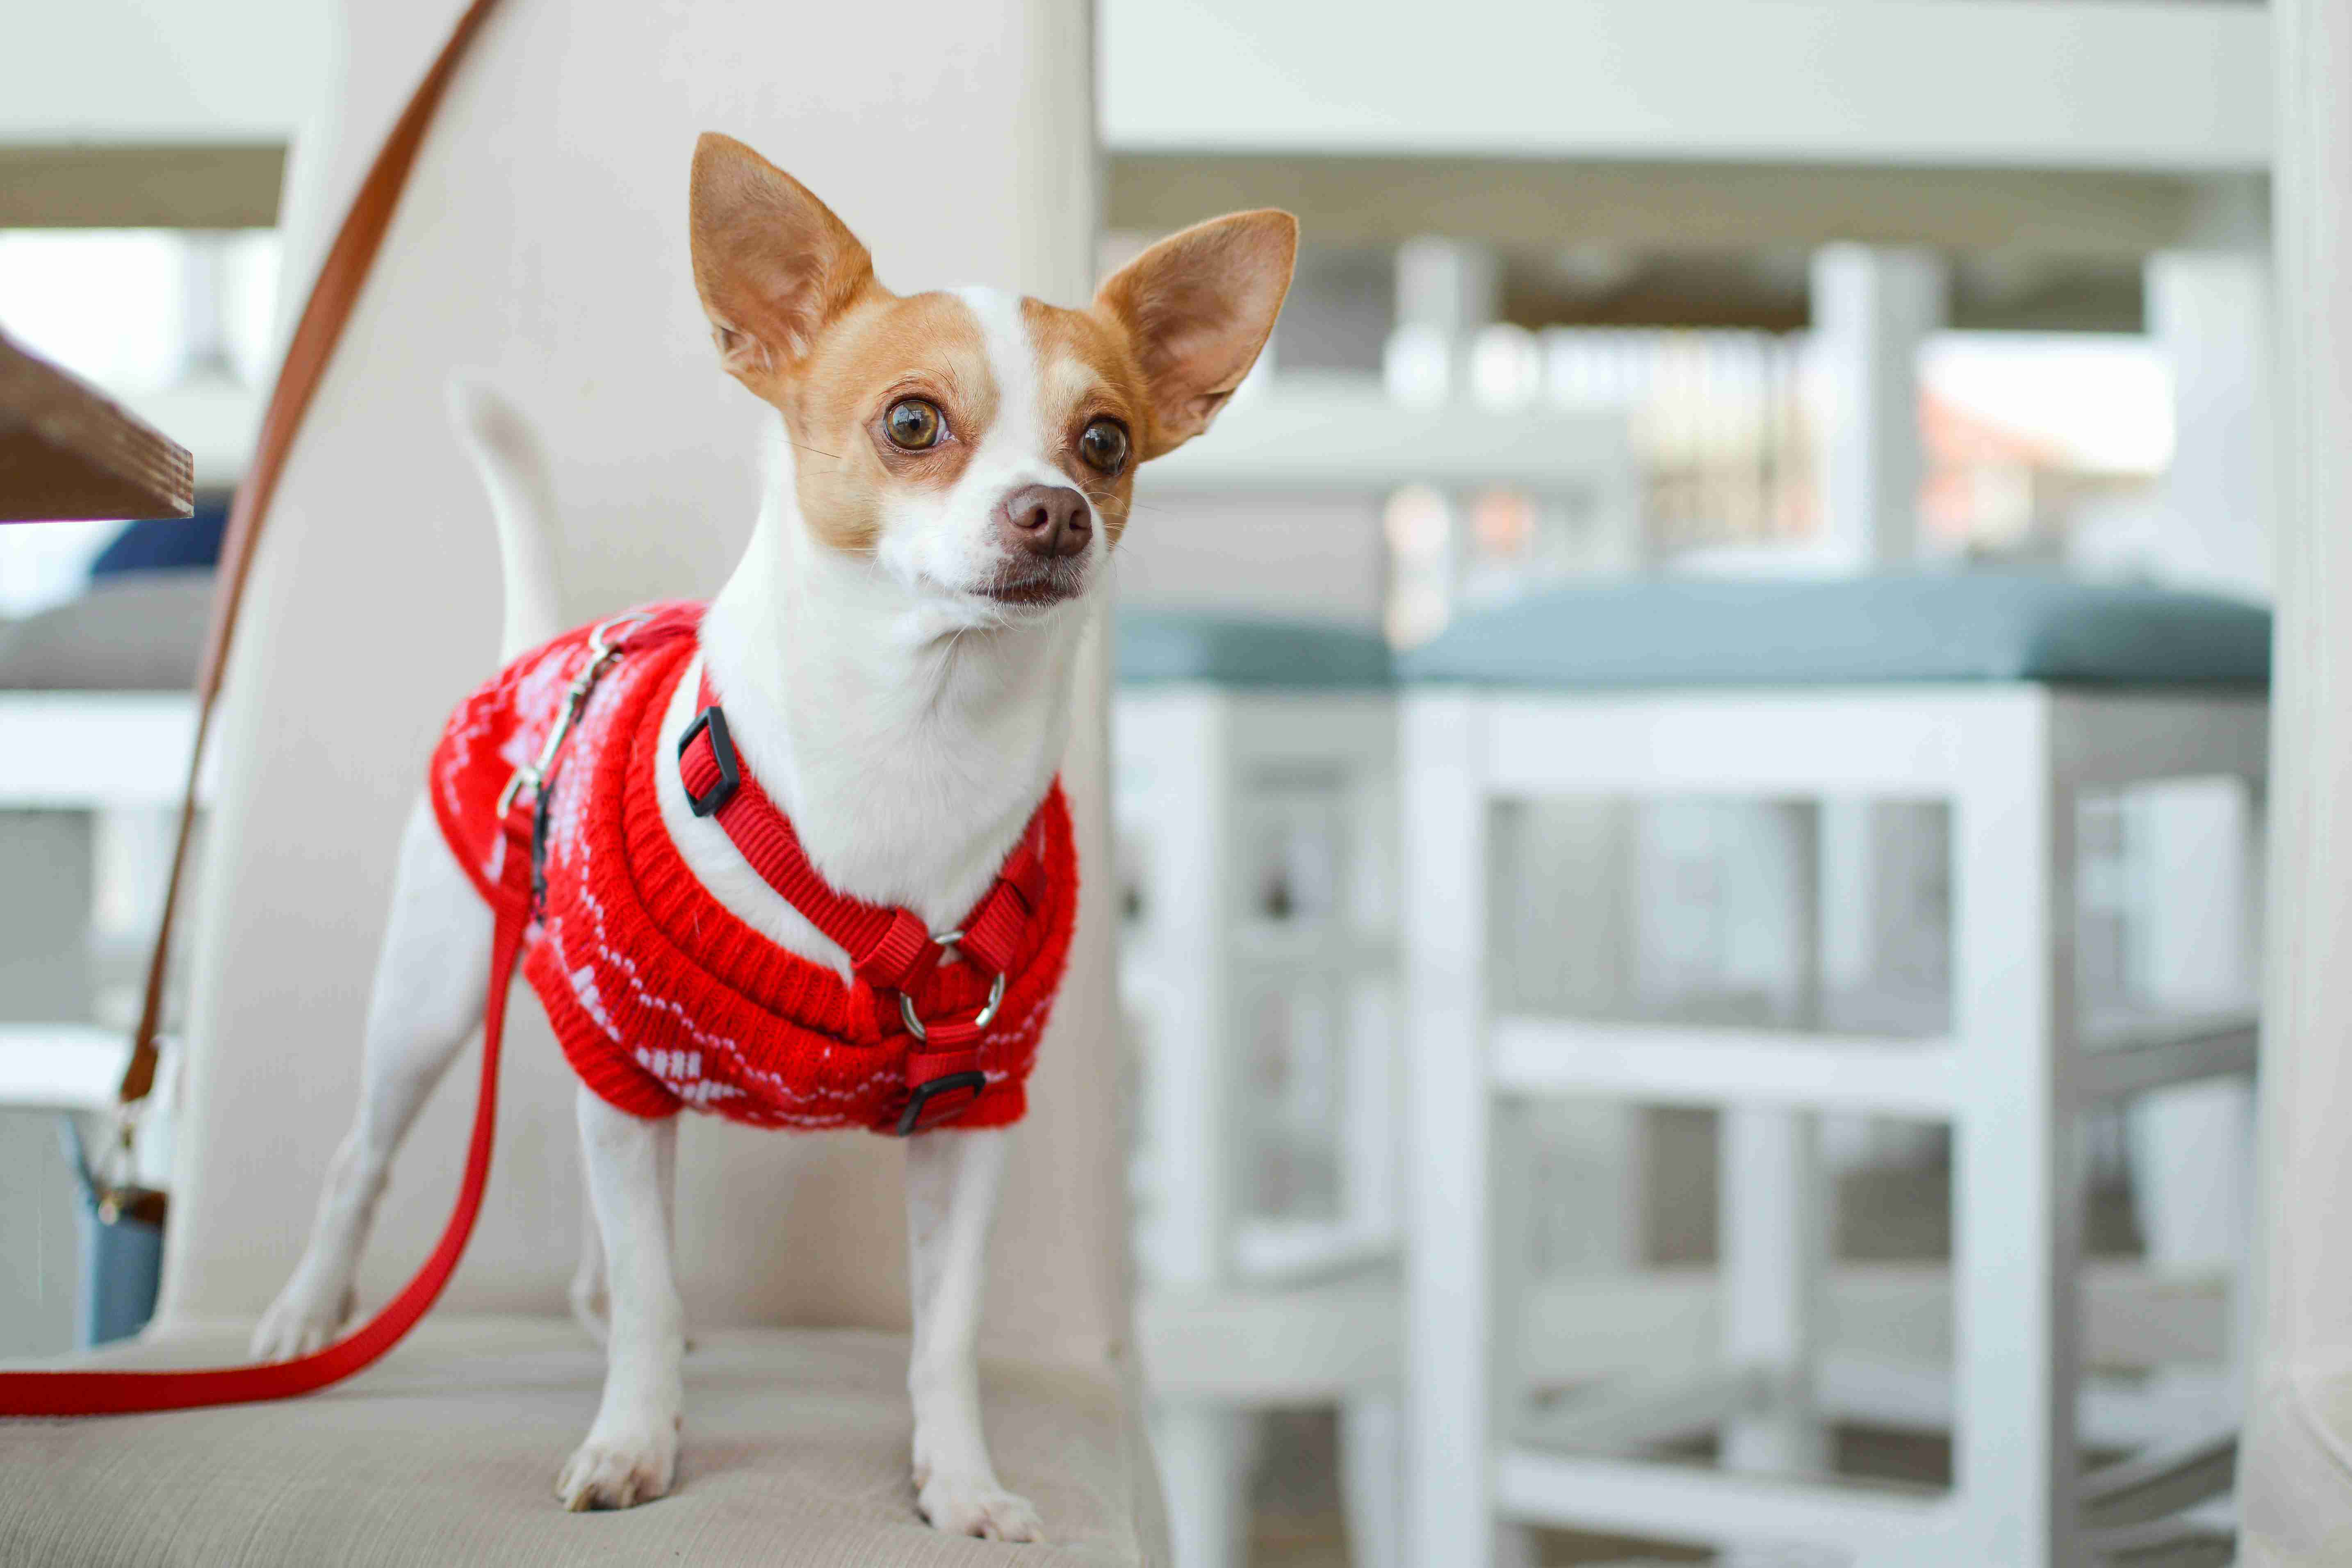 Can Chihuahuas be aggressive due to a lack of socialization or exposure to different people and environments?